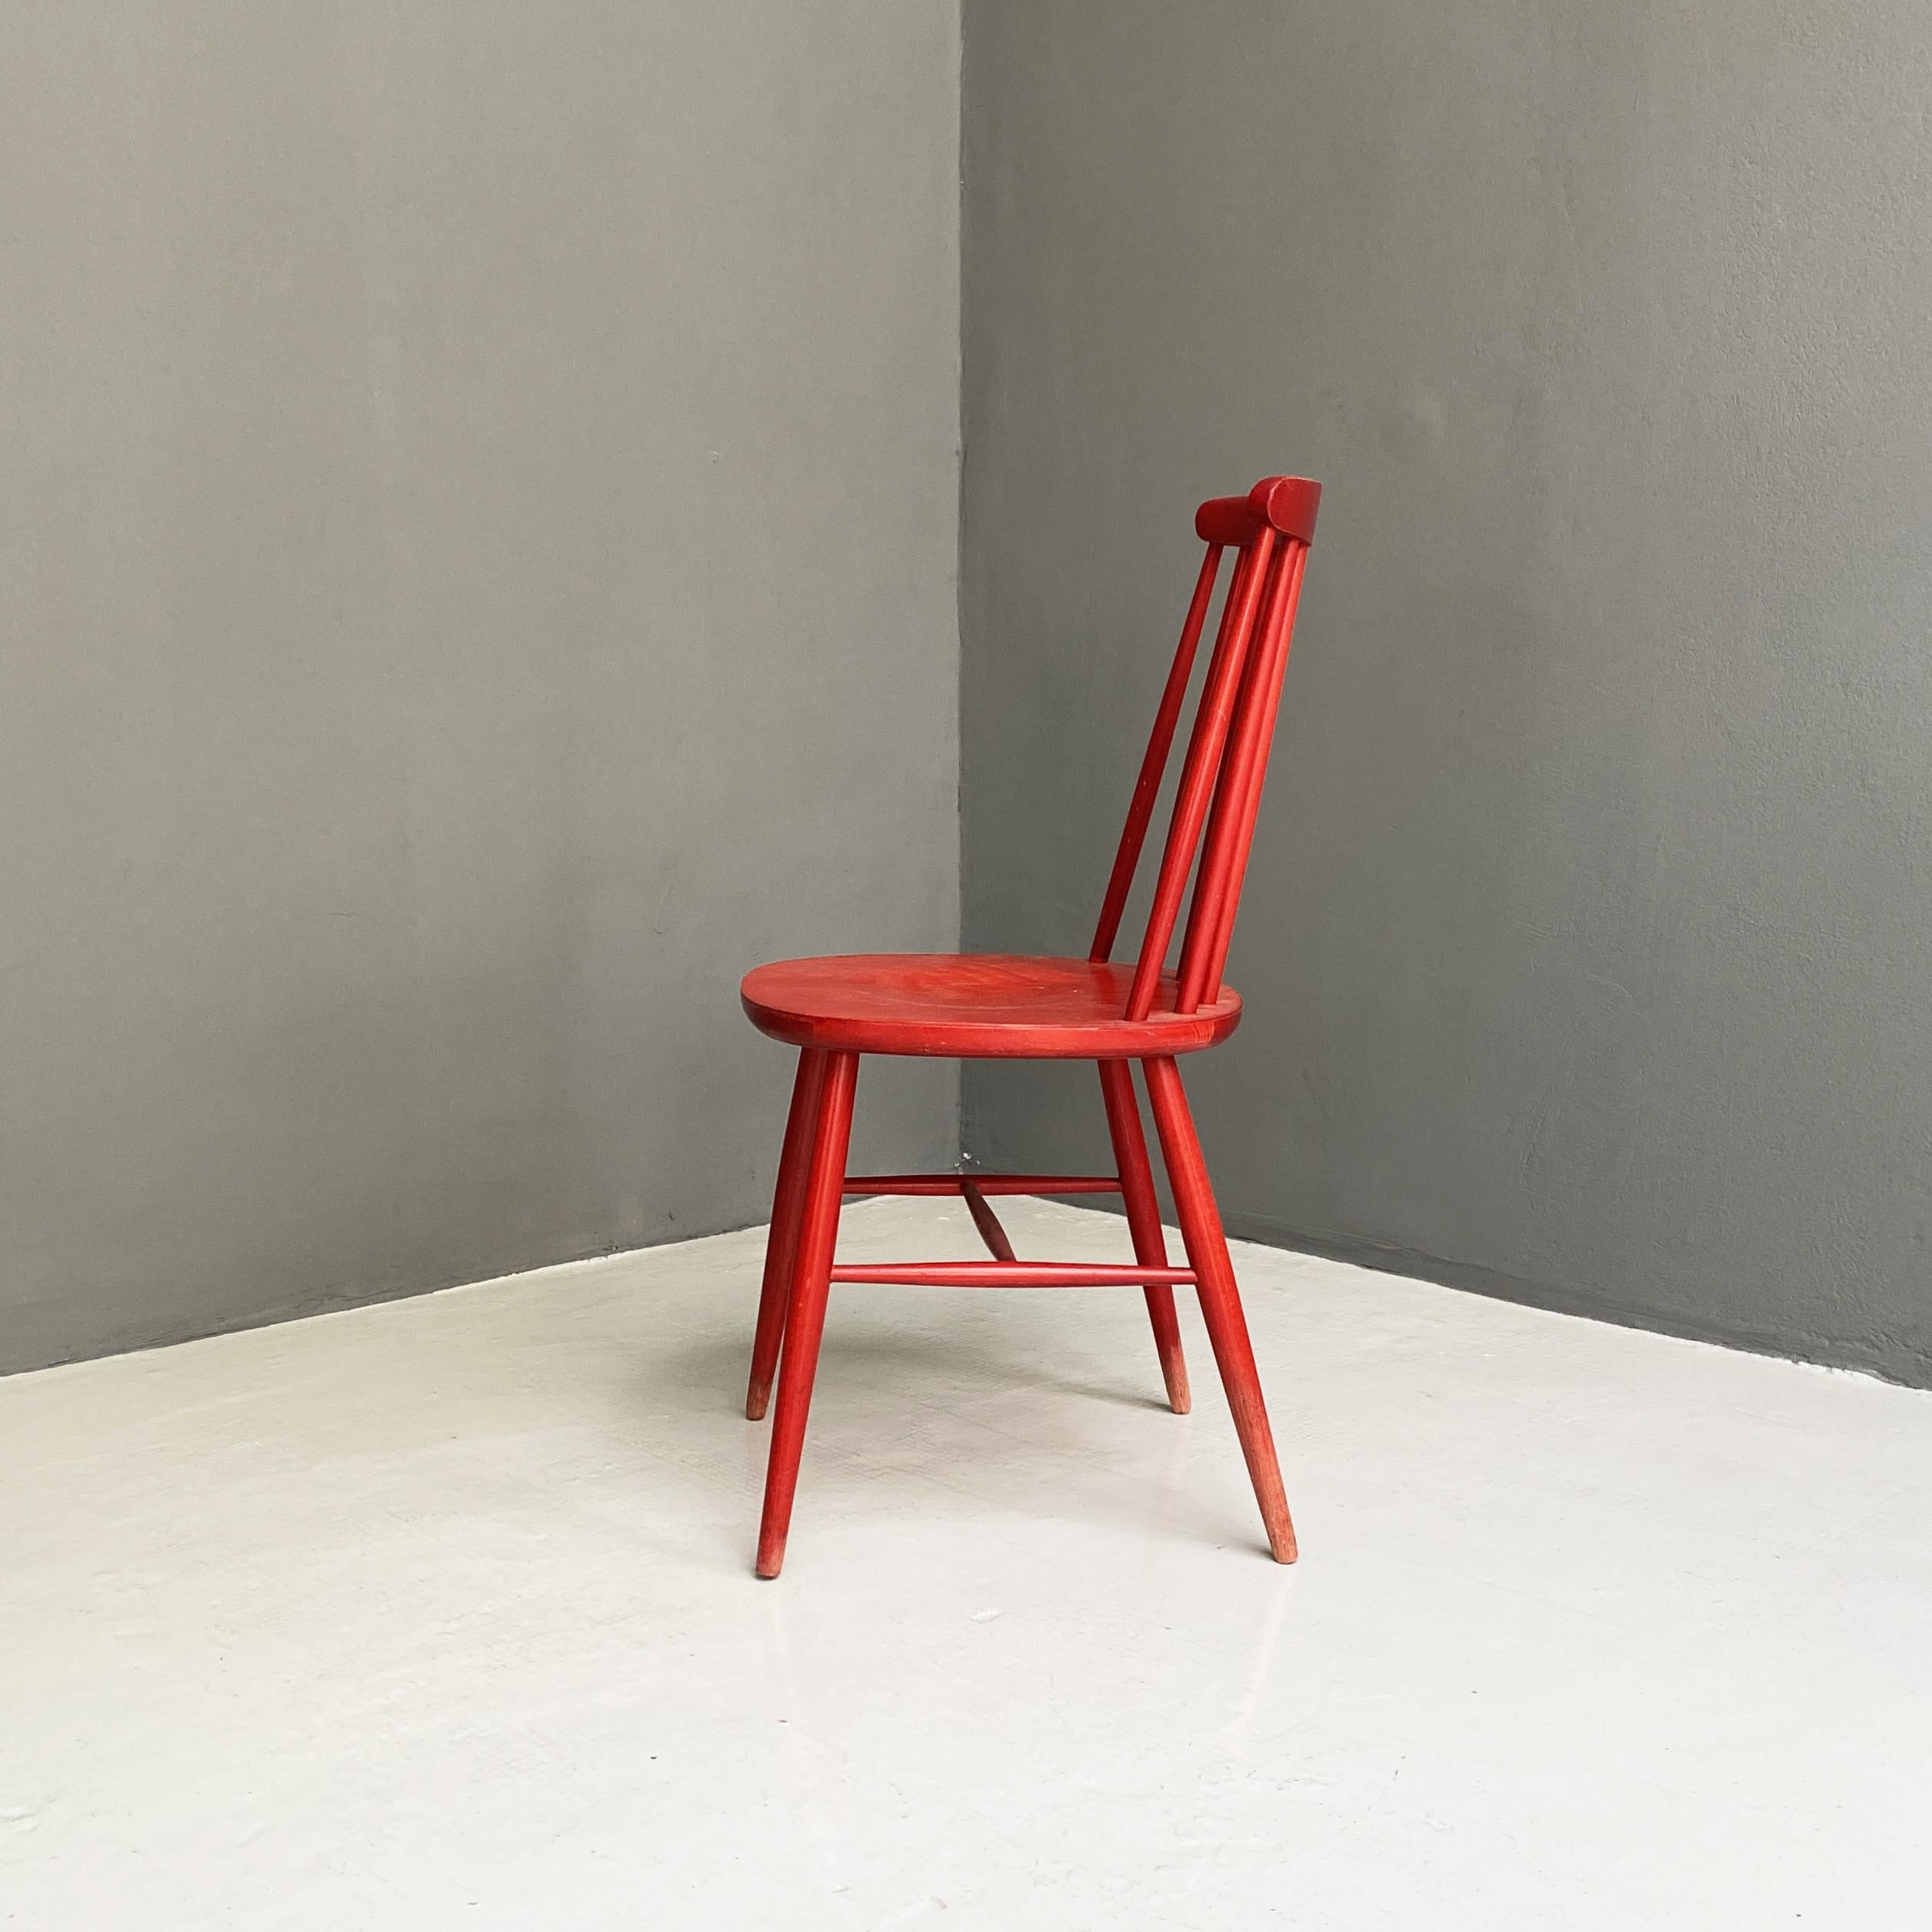 Mid-Century Modern northern Europe Red wooden chair, 1960s

Chair in beech solid wood painted in red with slat backrest.
1960s
Very Good condition, paint skipped on some points.
This chair  is perfect for a kitchen table or a desk, the confort of